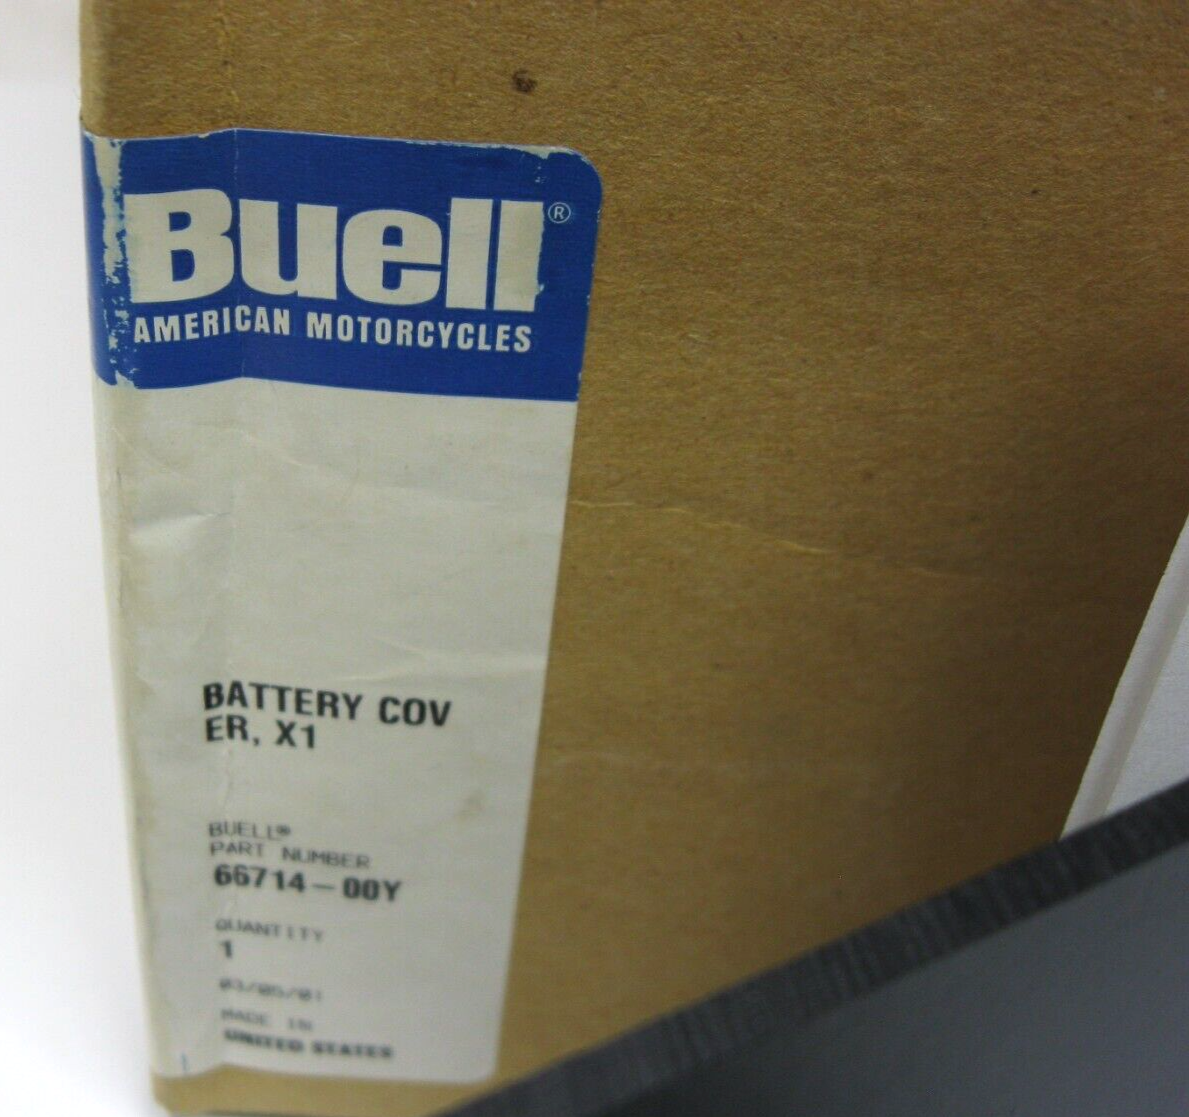 Buell OEM 99 & Later X1 Battery Cover 66714-00Y